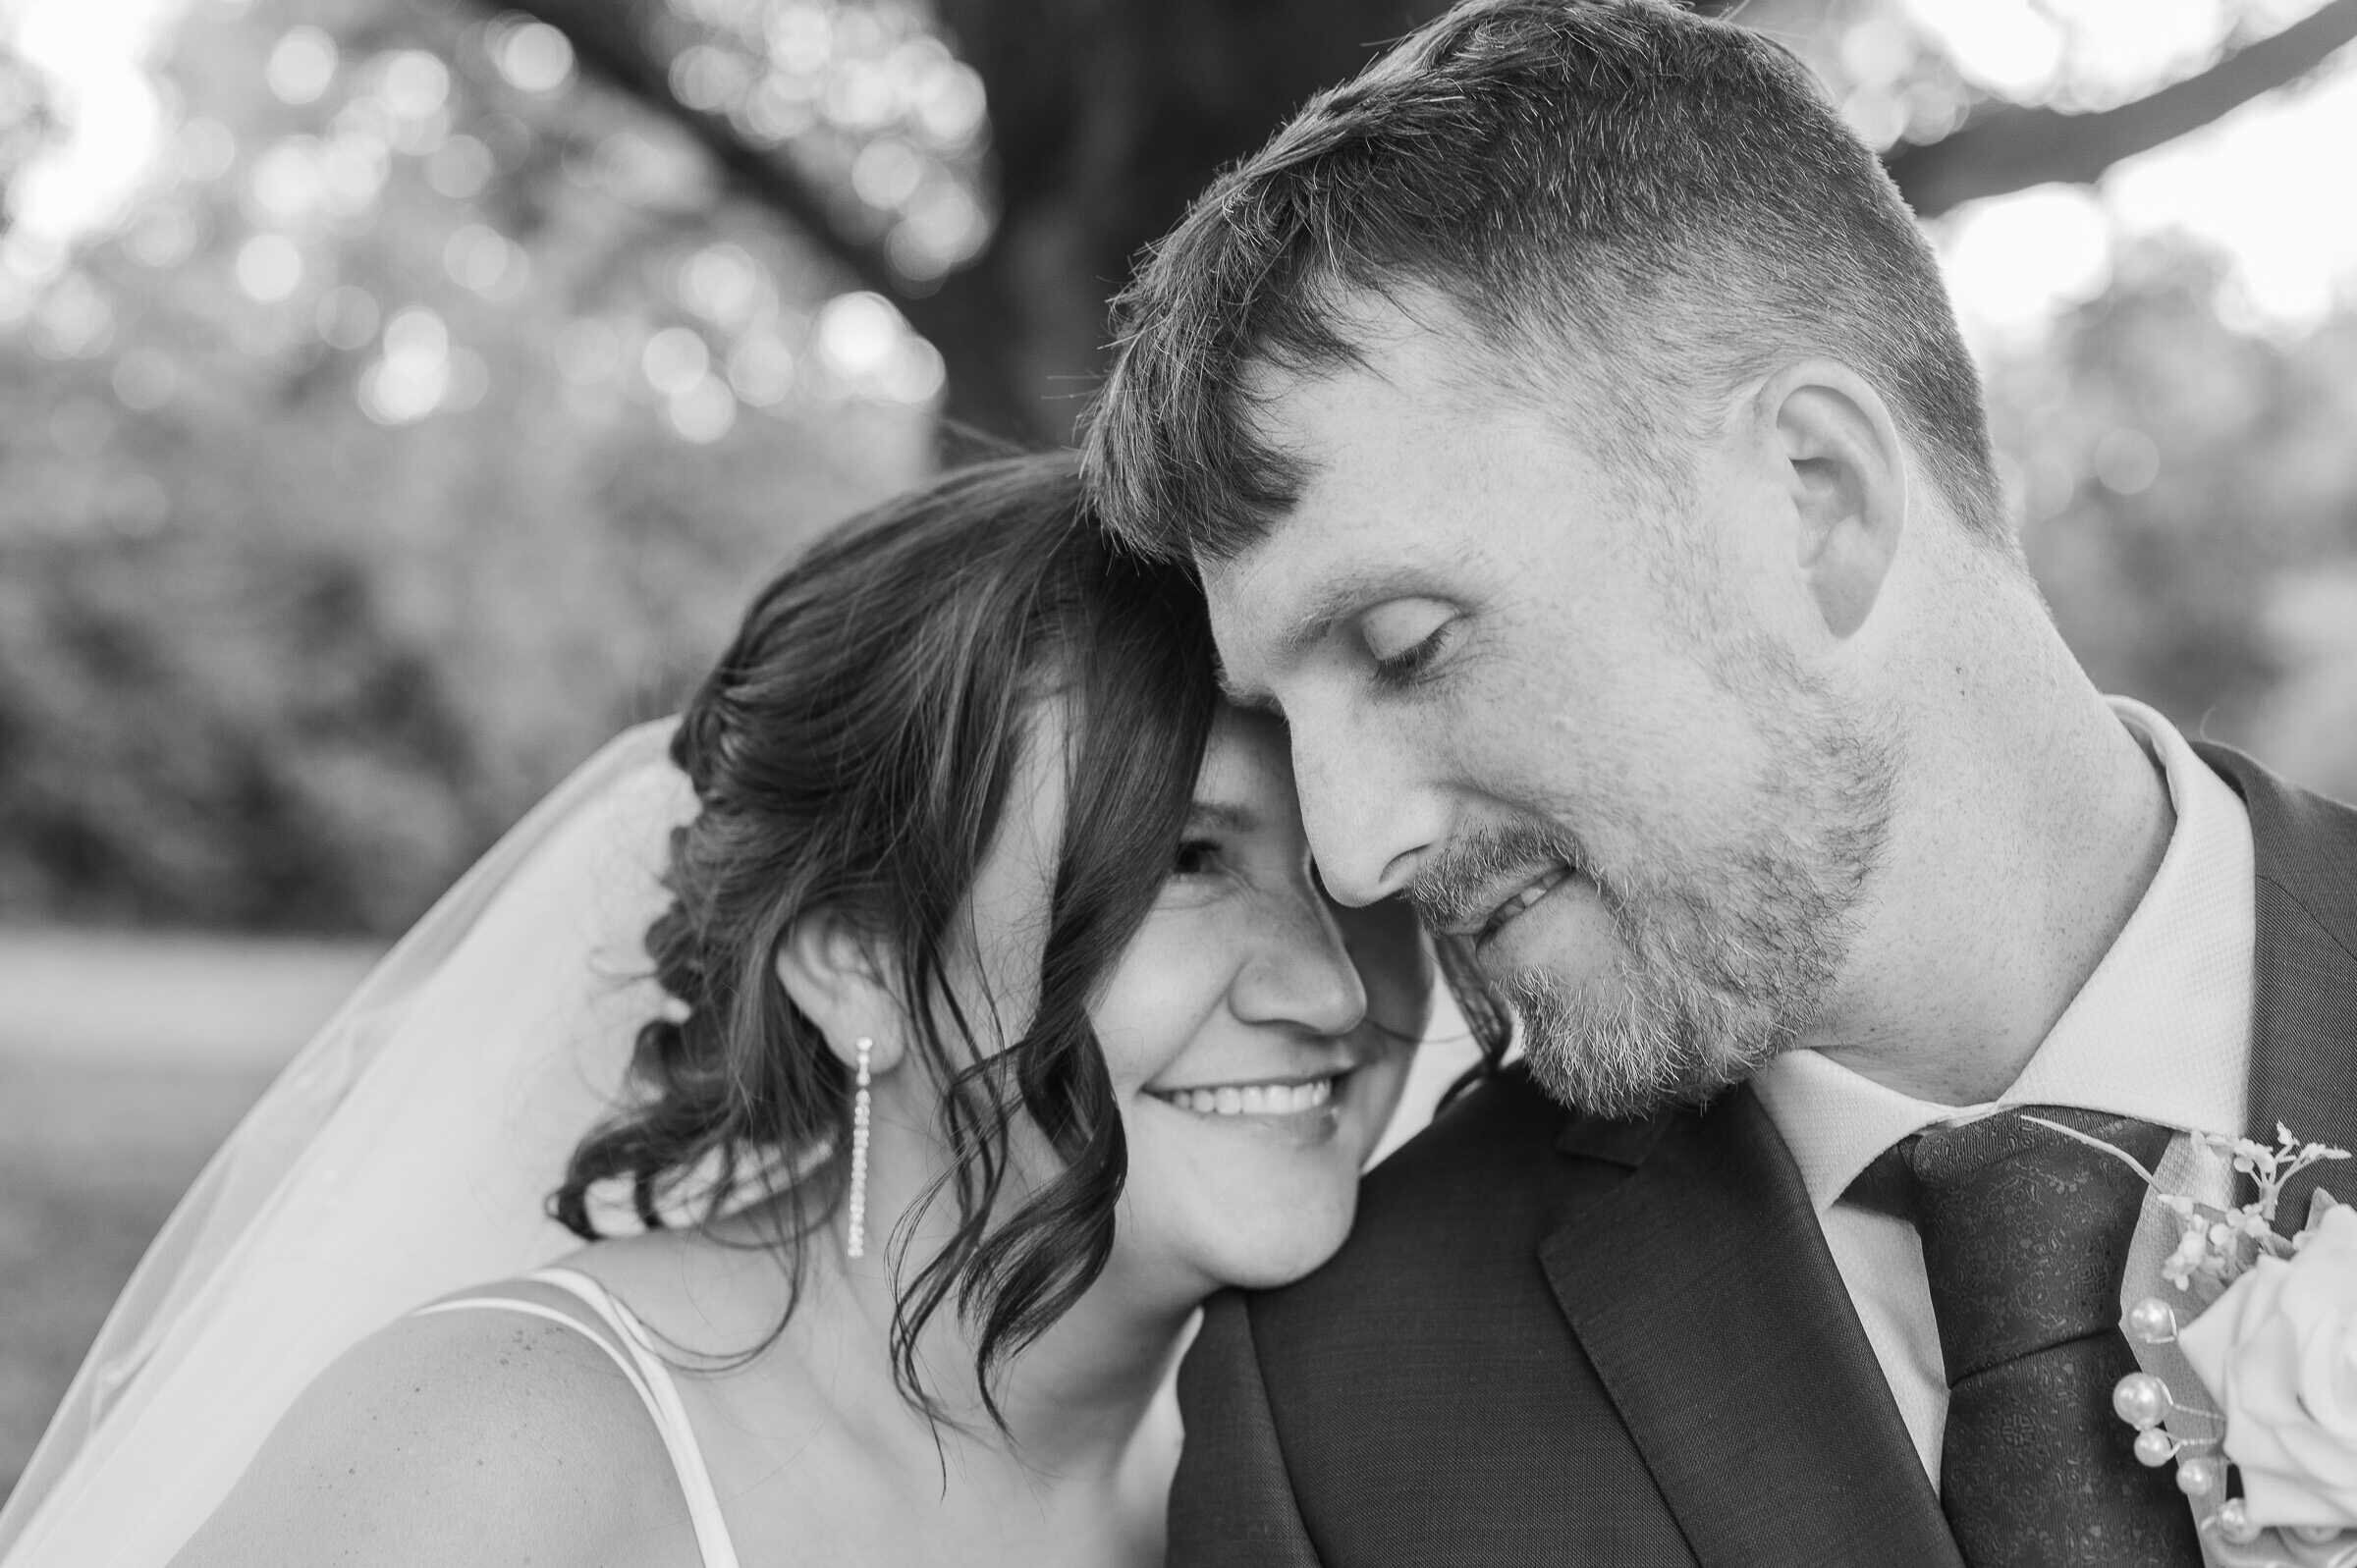 Bride and Groom rest their foreheads together sharing a sweet smile